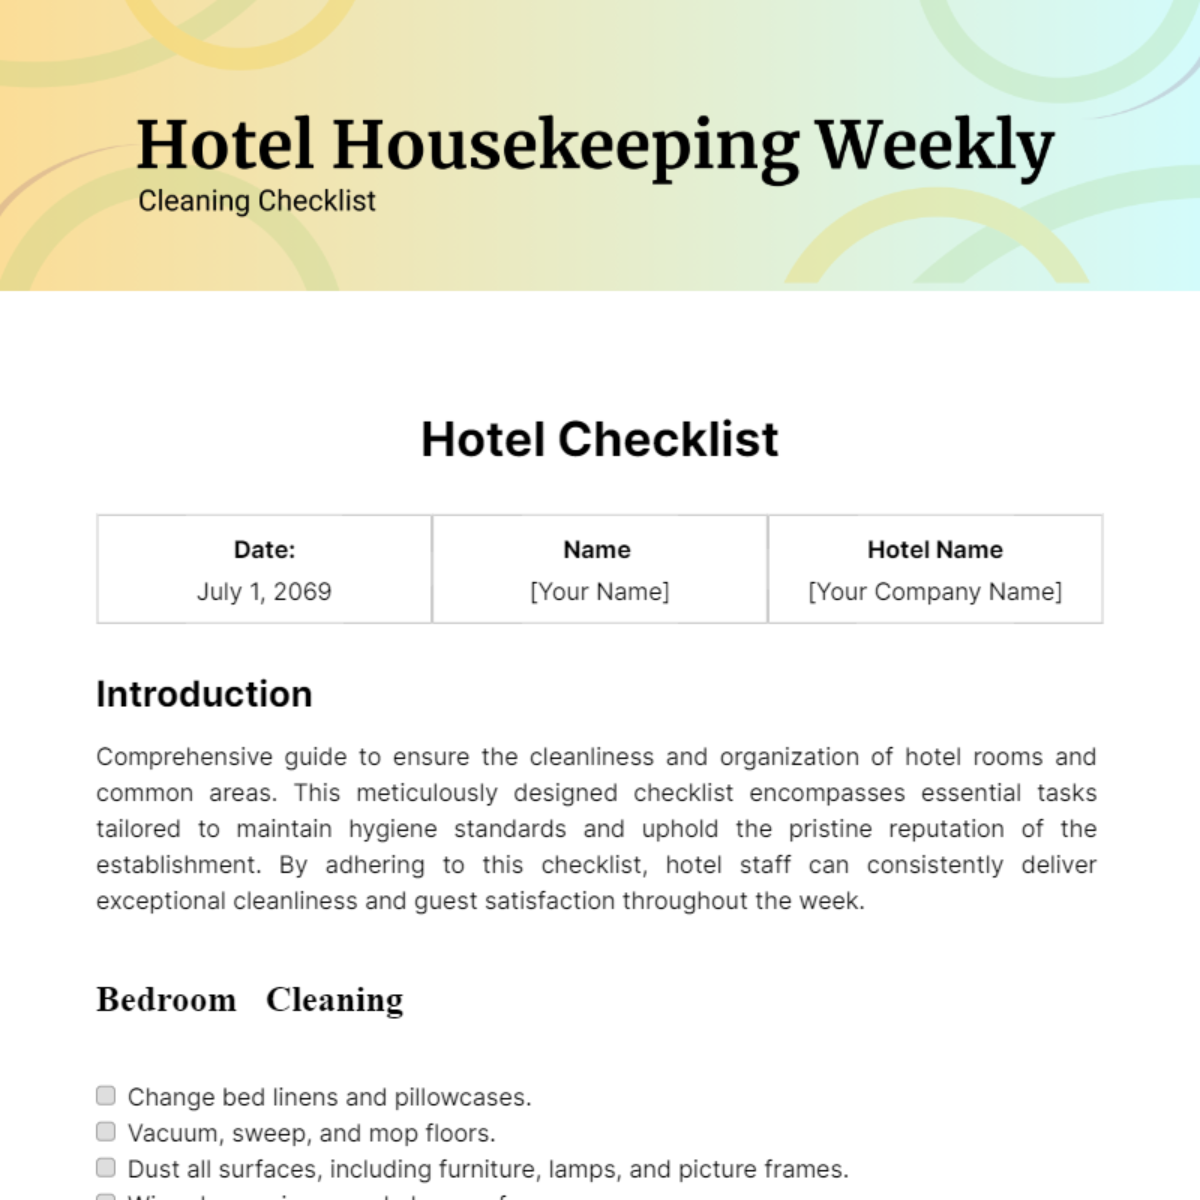 Free Hotel Housekeeping Weekly Cleaning Checklist Template